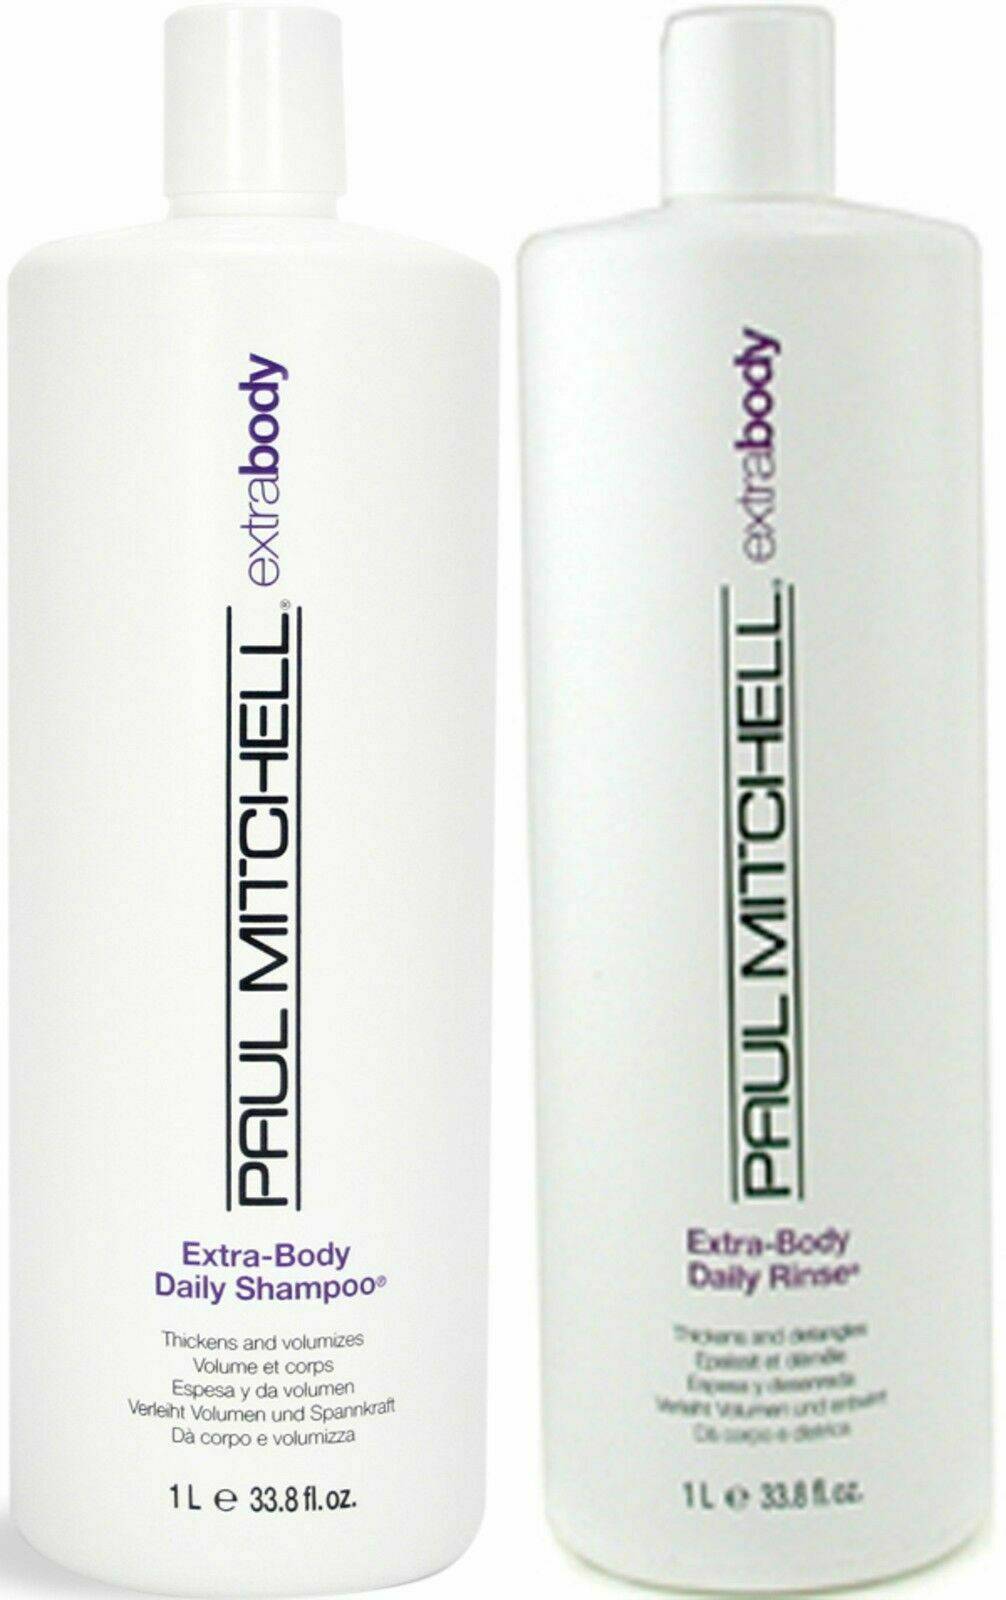 Paul Mitchell Extra-Body Thickens. Volumizes Shampoo and Conditioner 1lt Duo - On Line Hair Depot